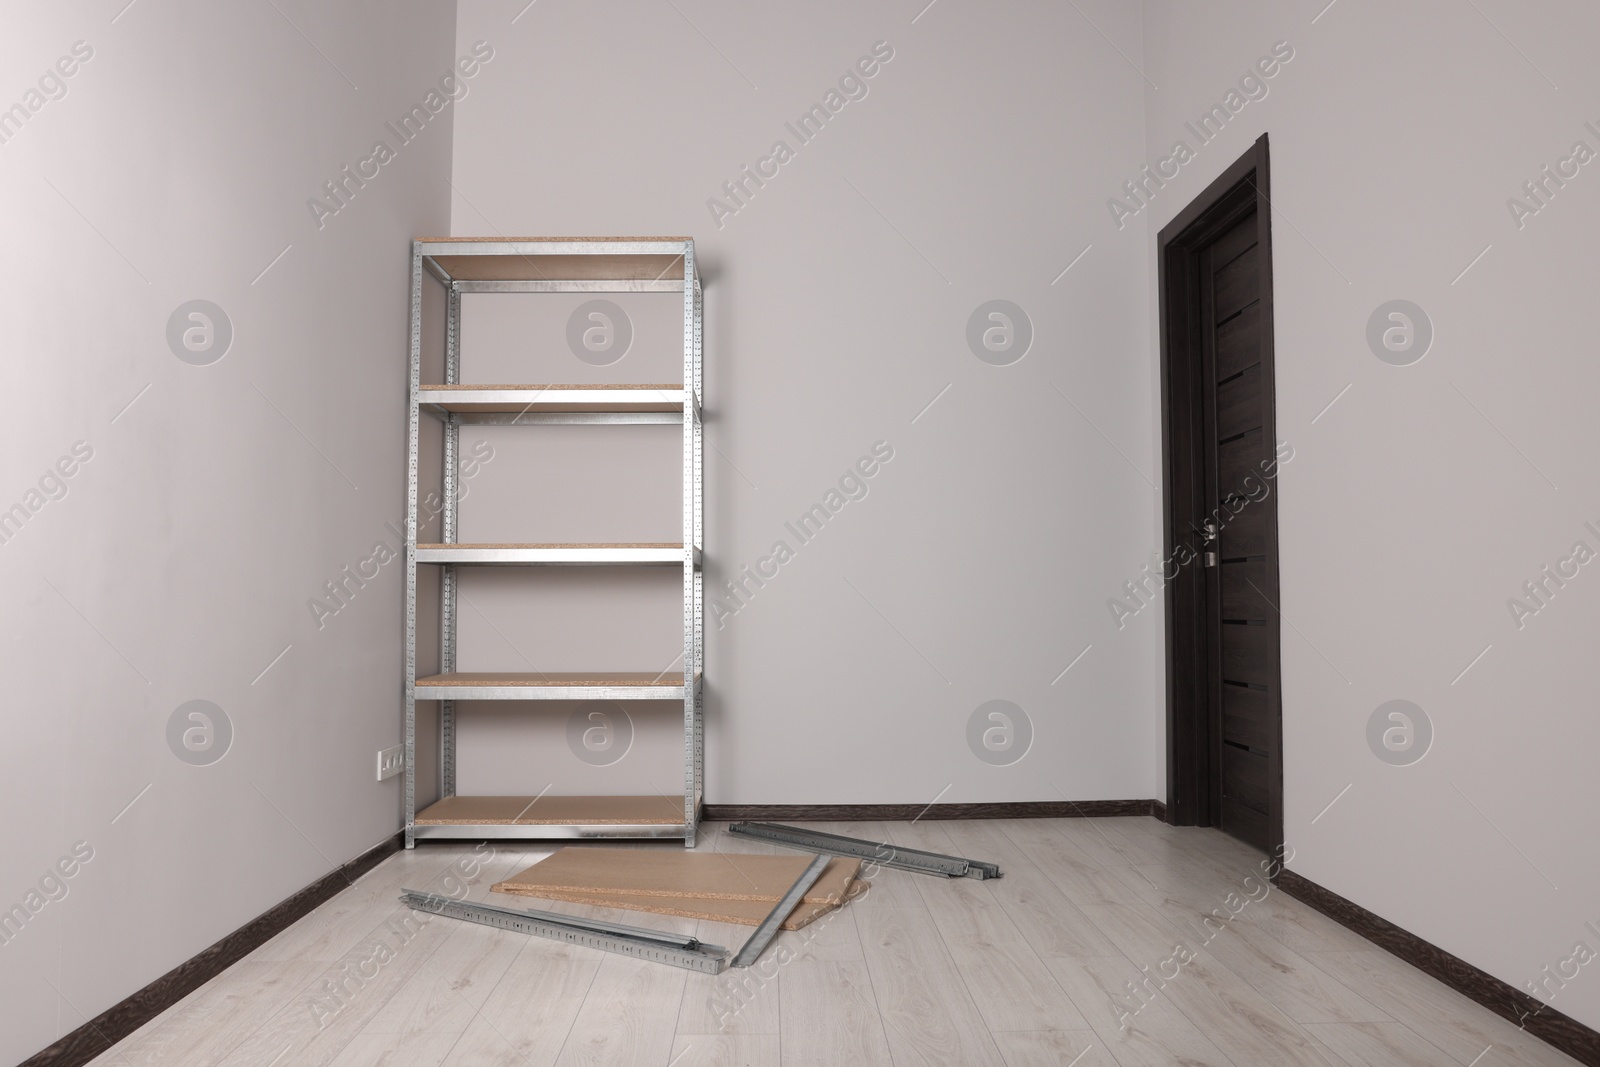 Photo of Office room with white walls and metal storage shelf